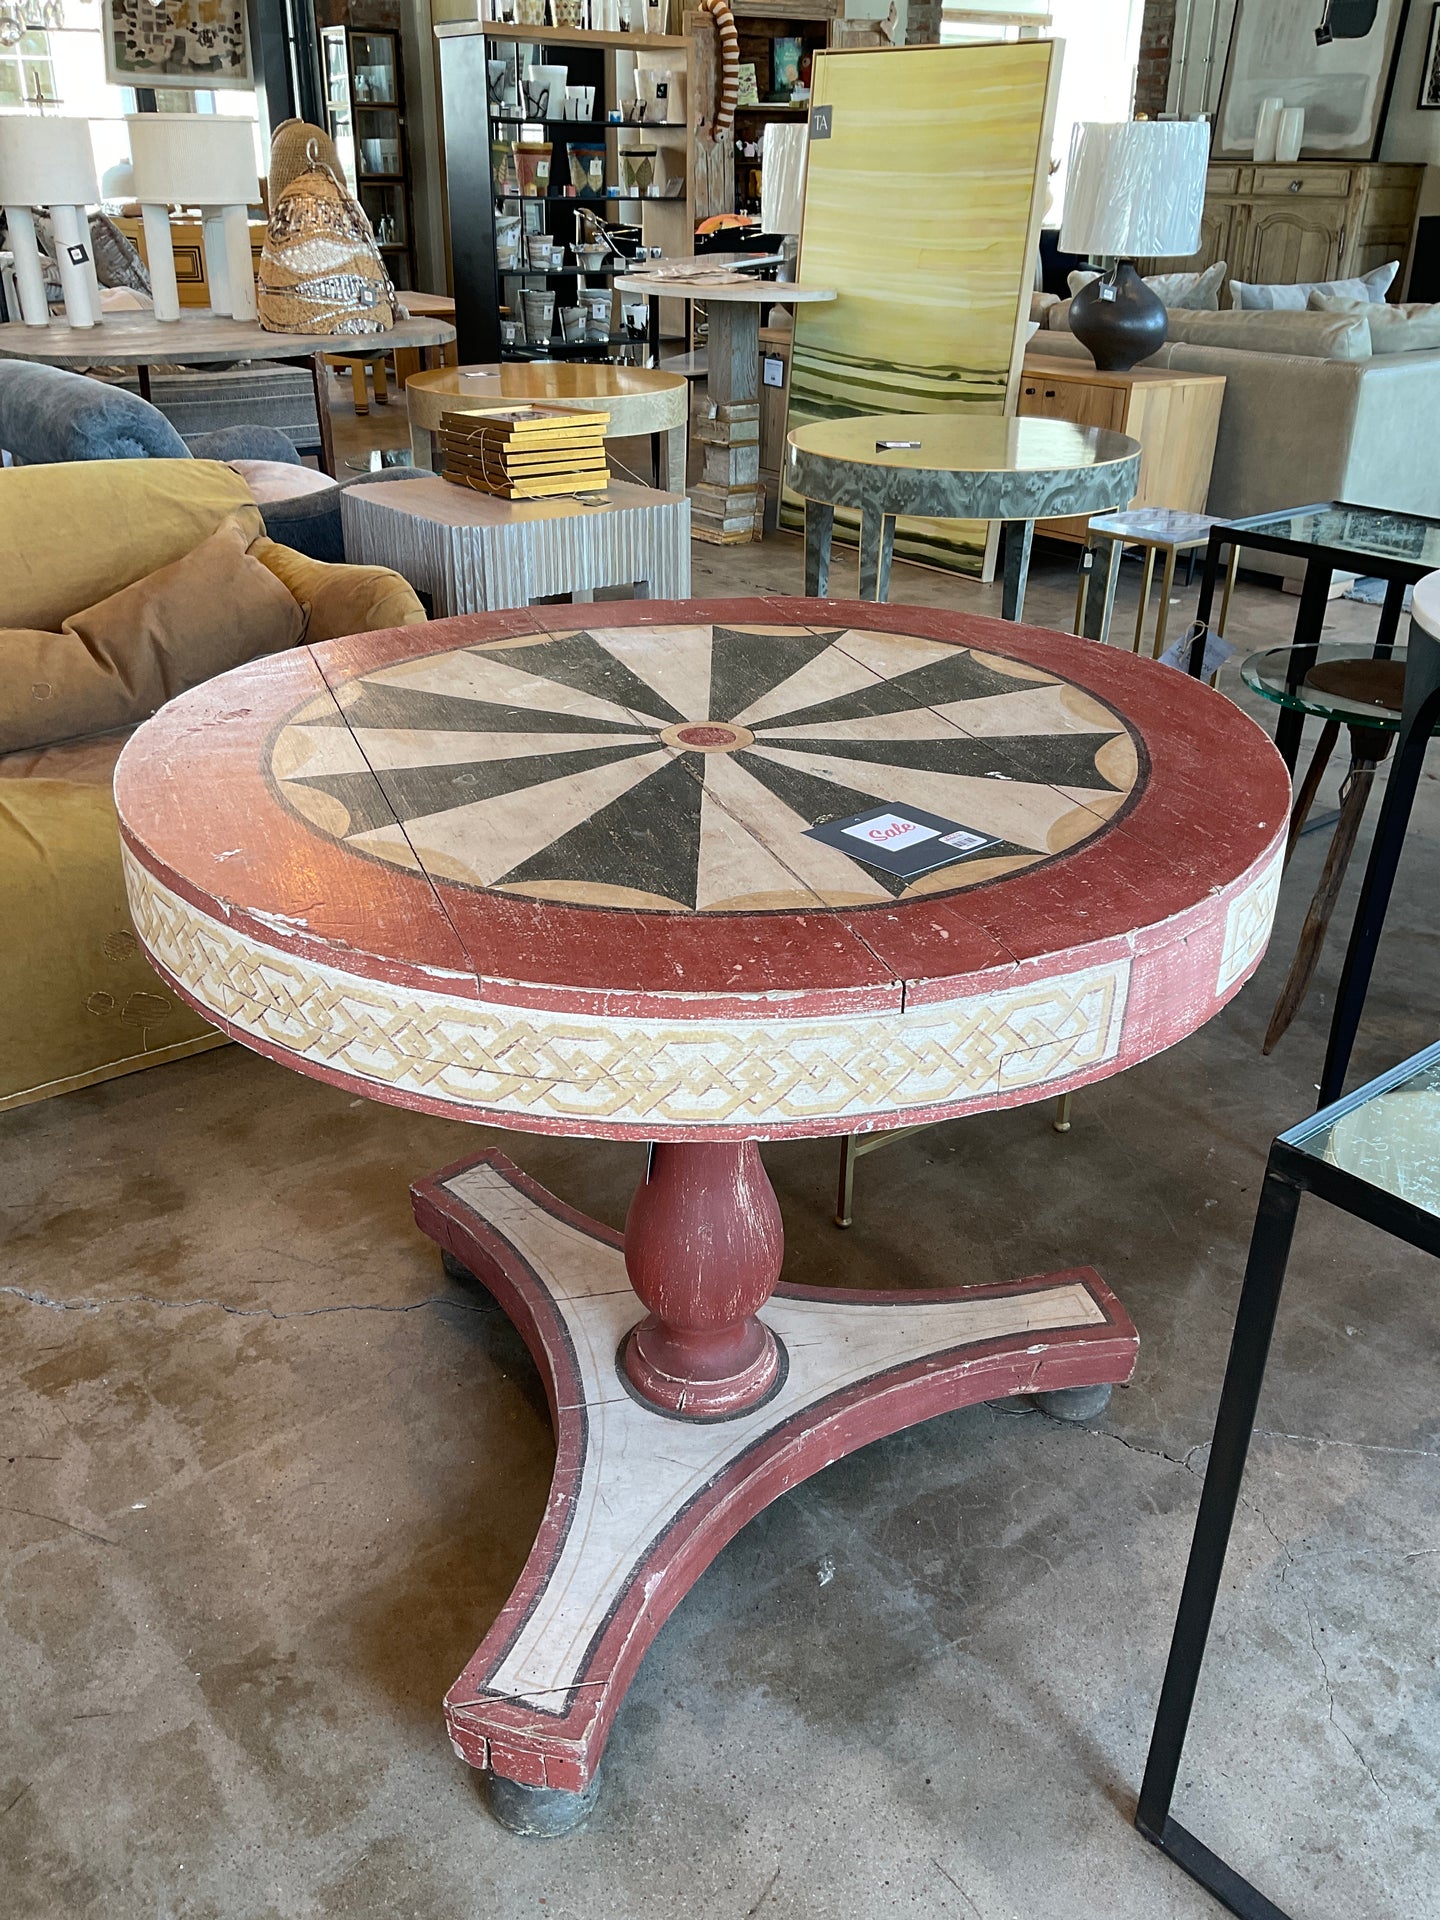 Highly Decorative Center Table